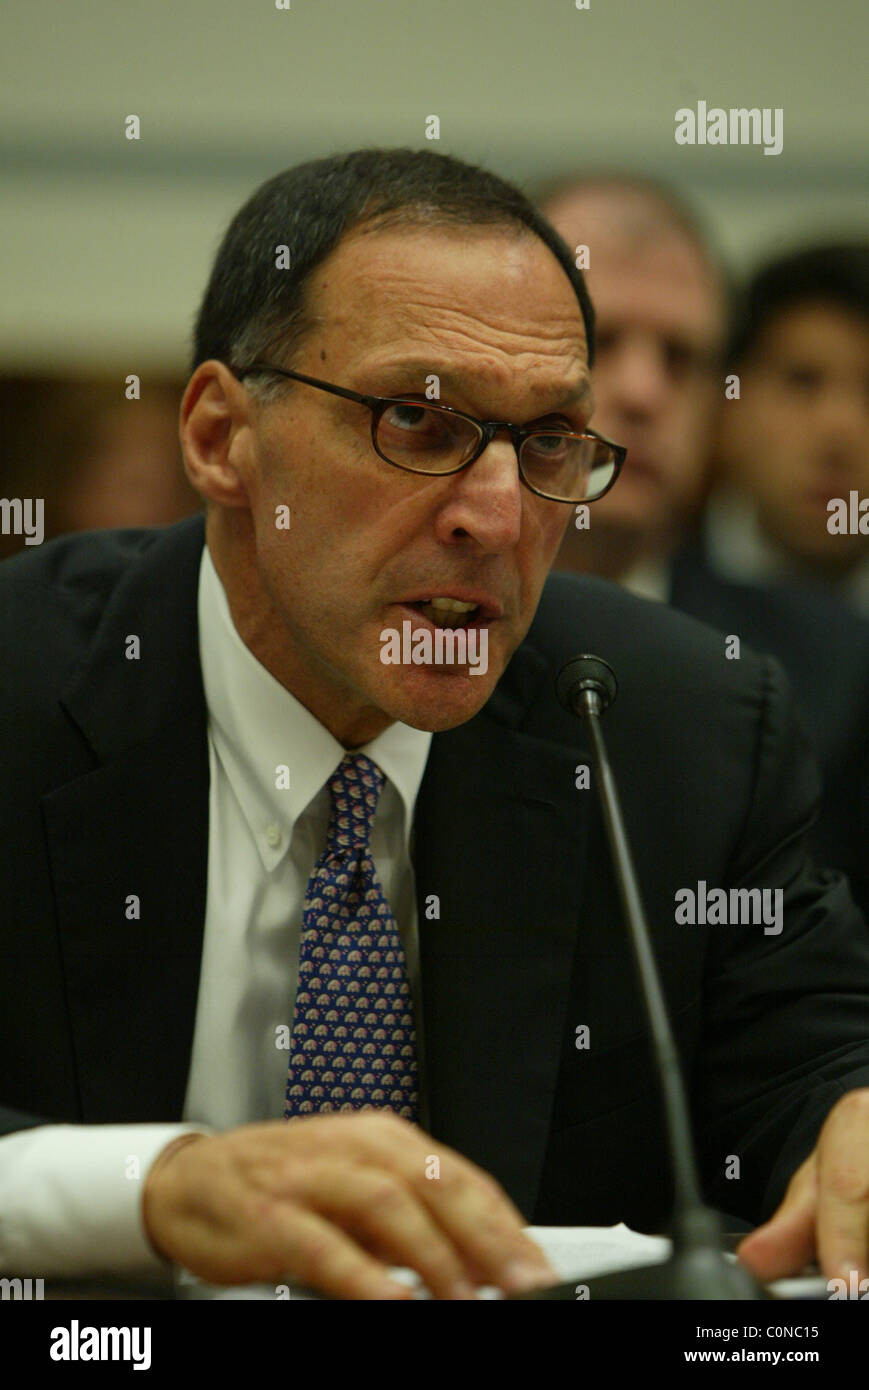 Richard fuld hires stock photography and images Alamy